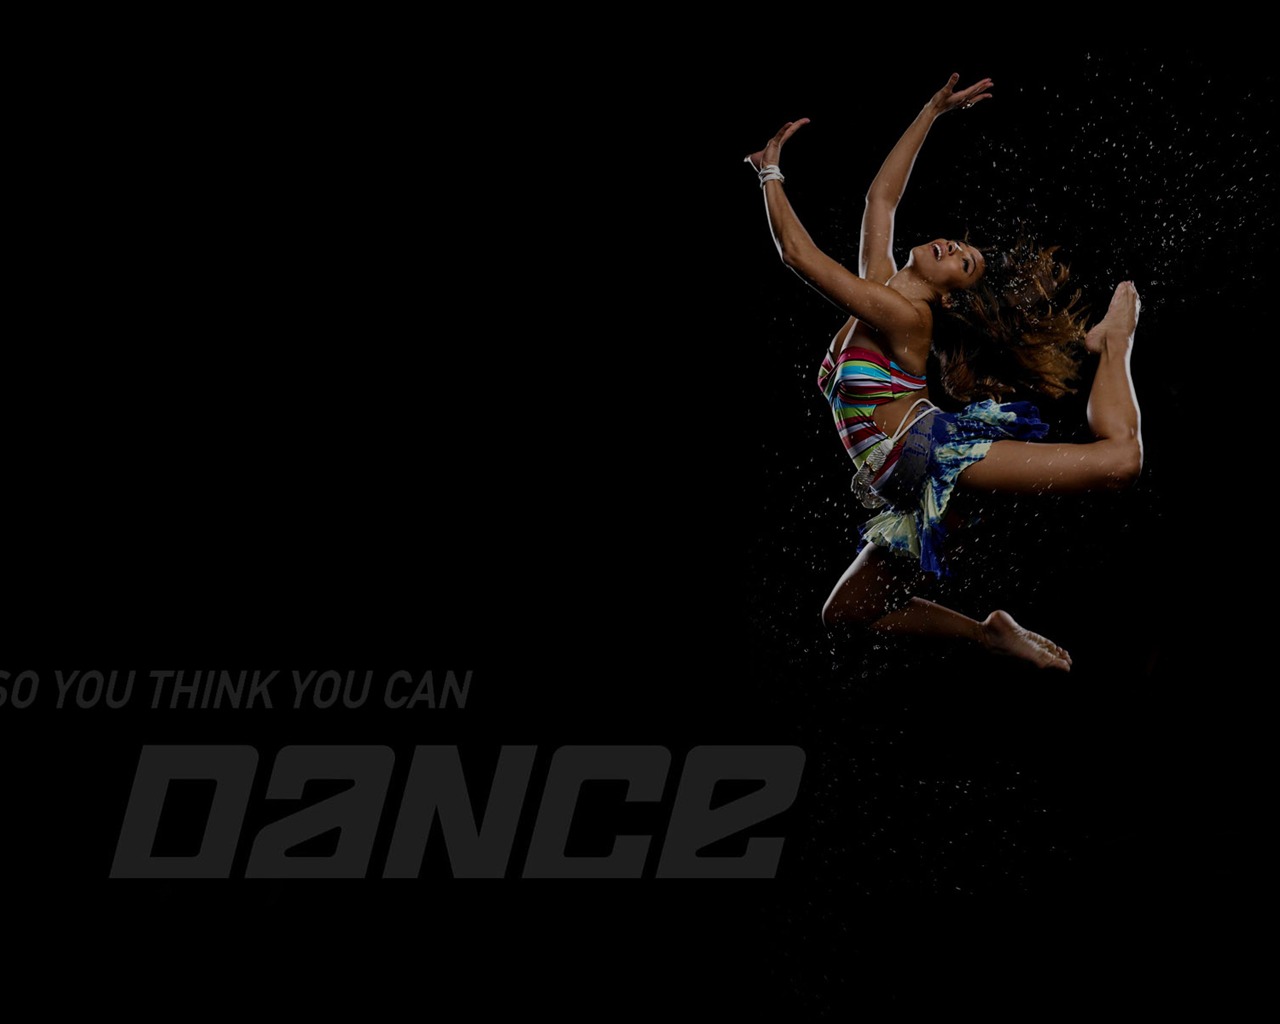 So You Think You Can Dance 舞林爭霸壁紙(二) #17 - 1280x1024